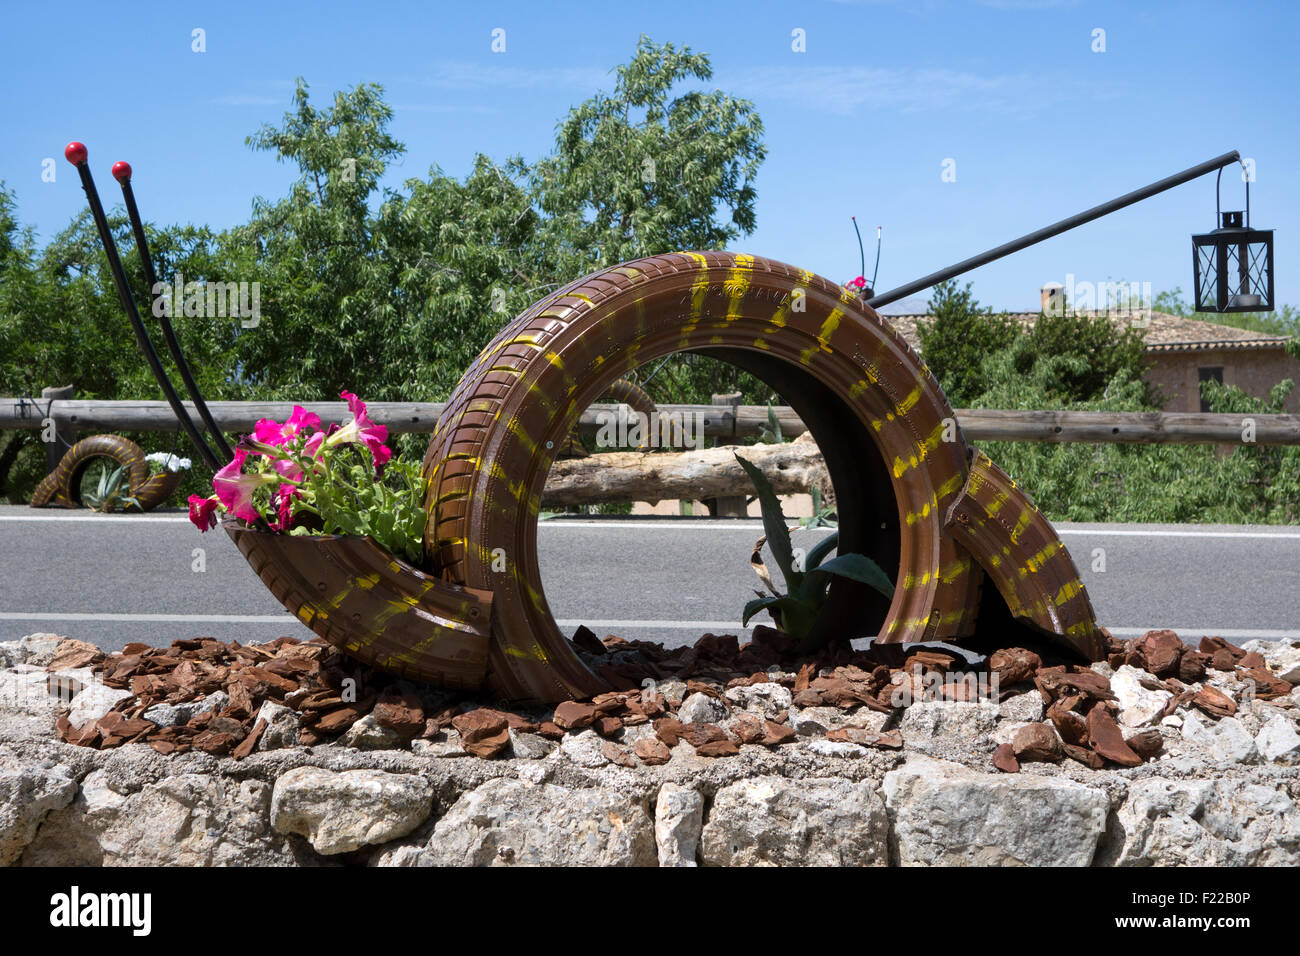 Decorative snails made of recycled tires. Stock Photo